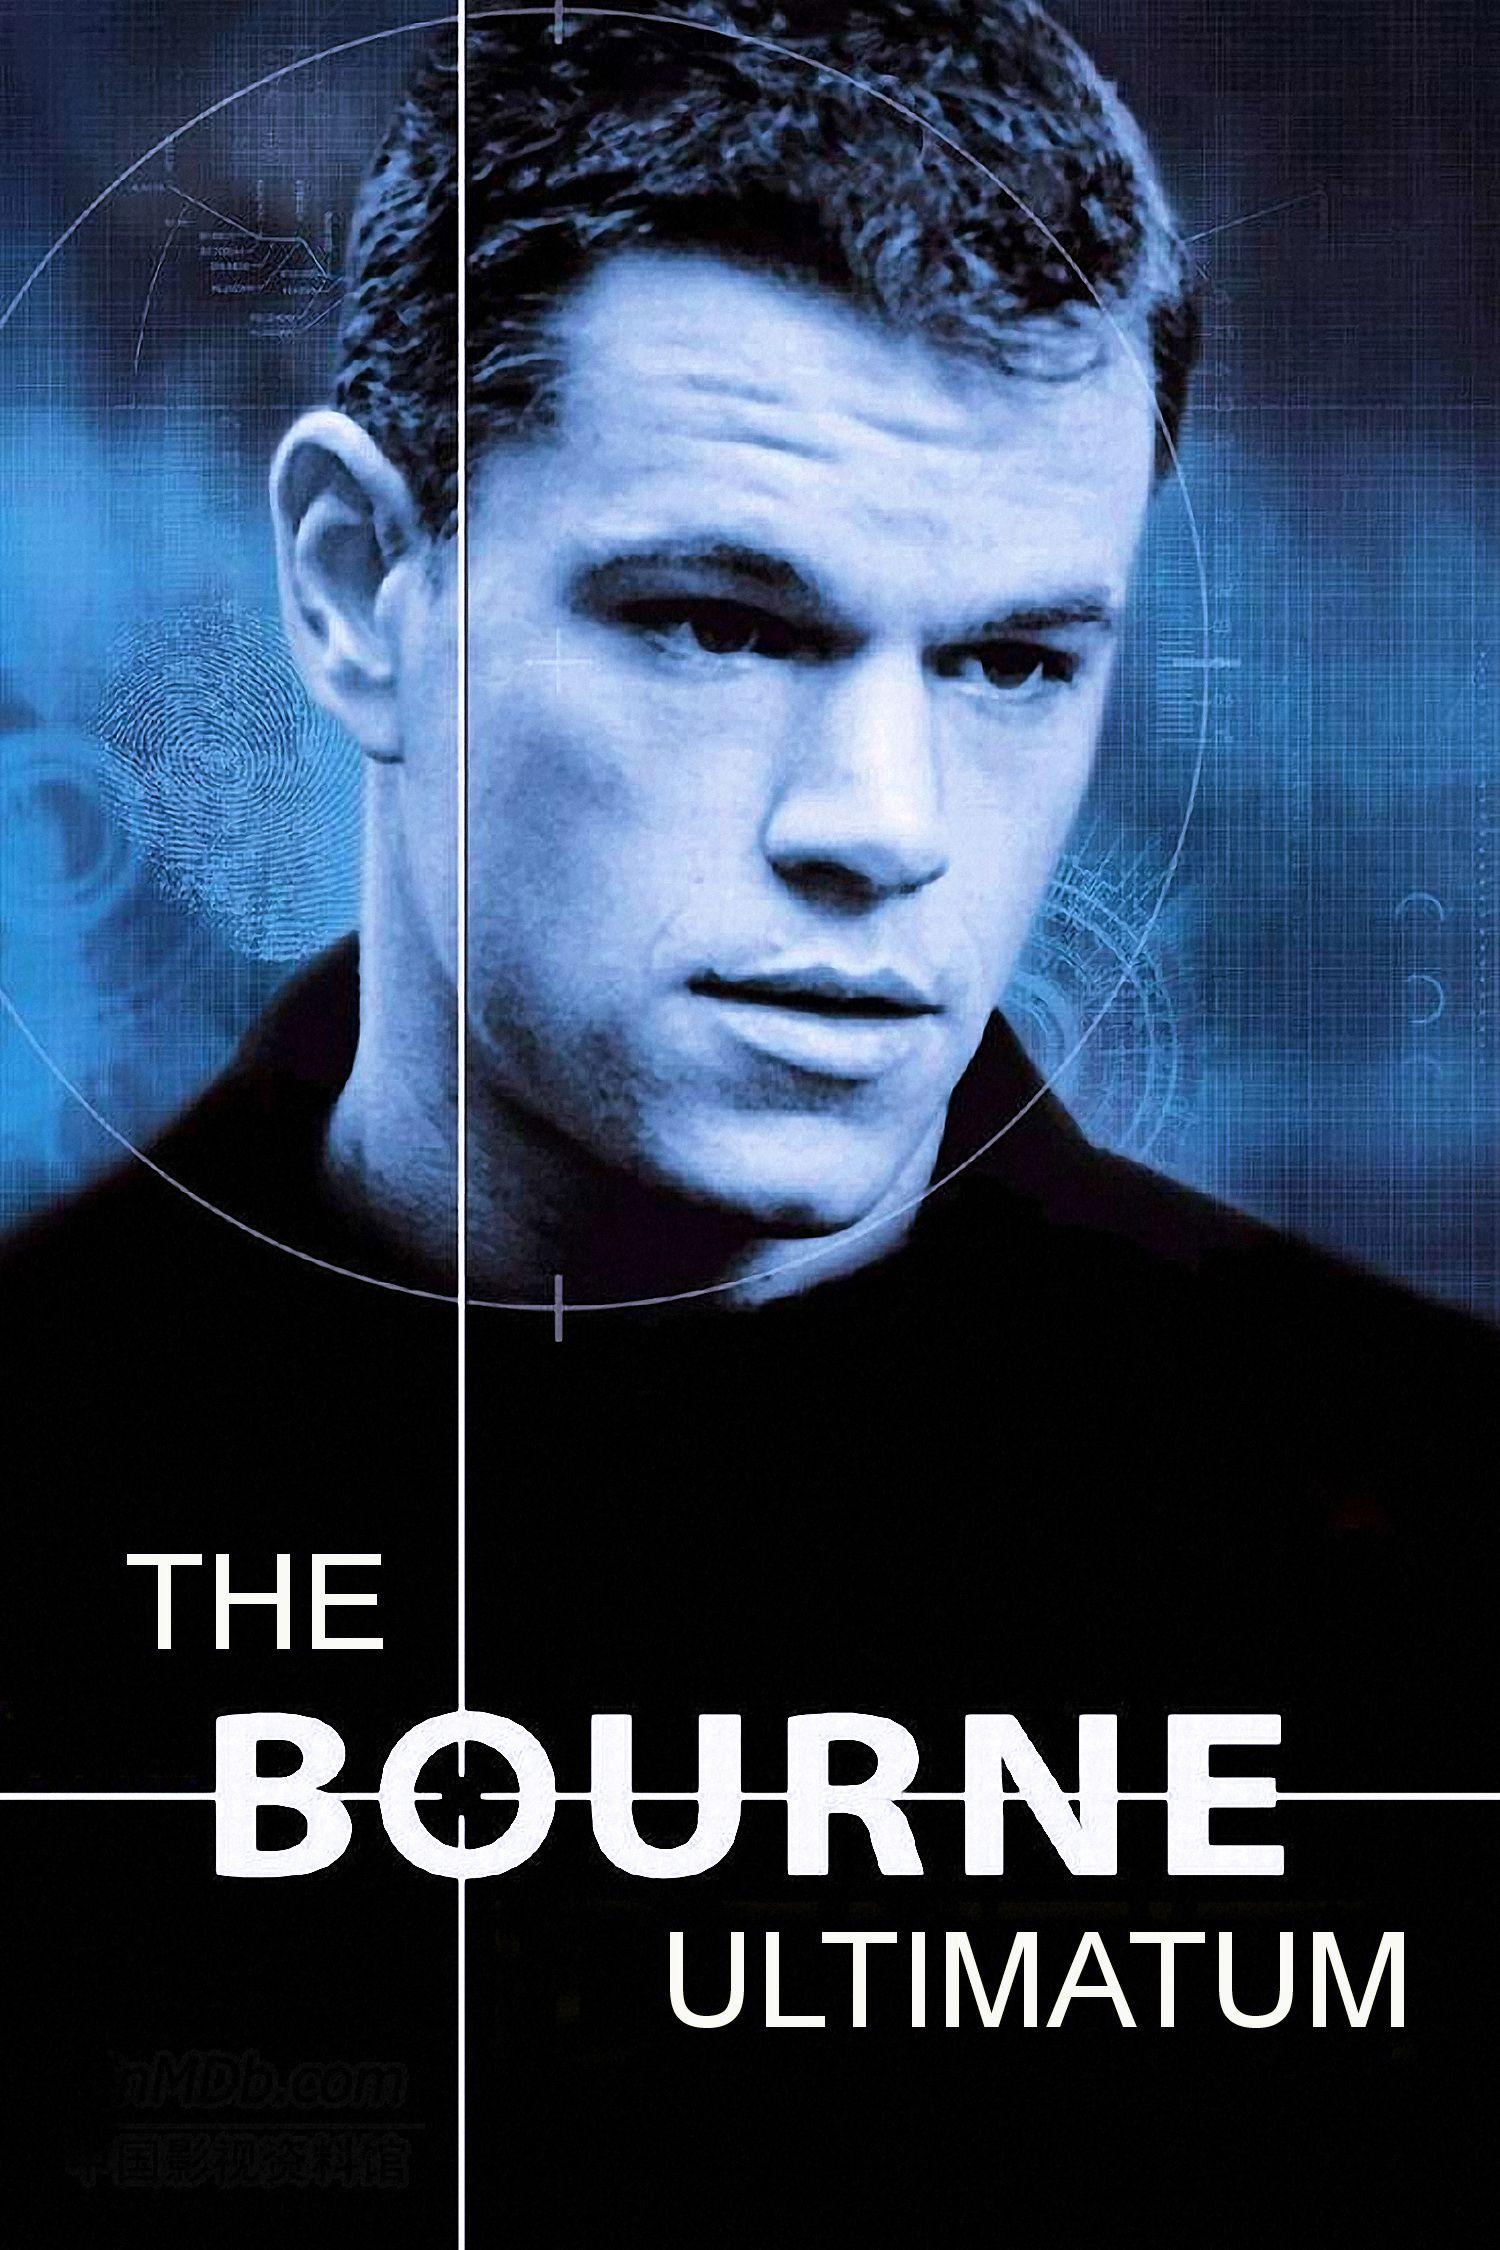 The Bourne Ultimatium. Movies and Books. Bourne movies